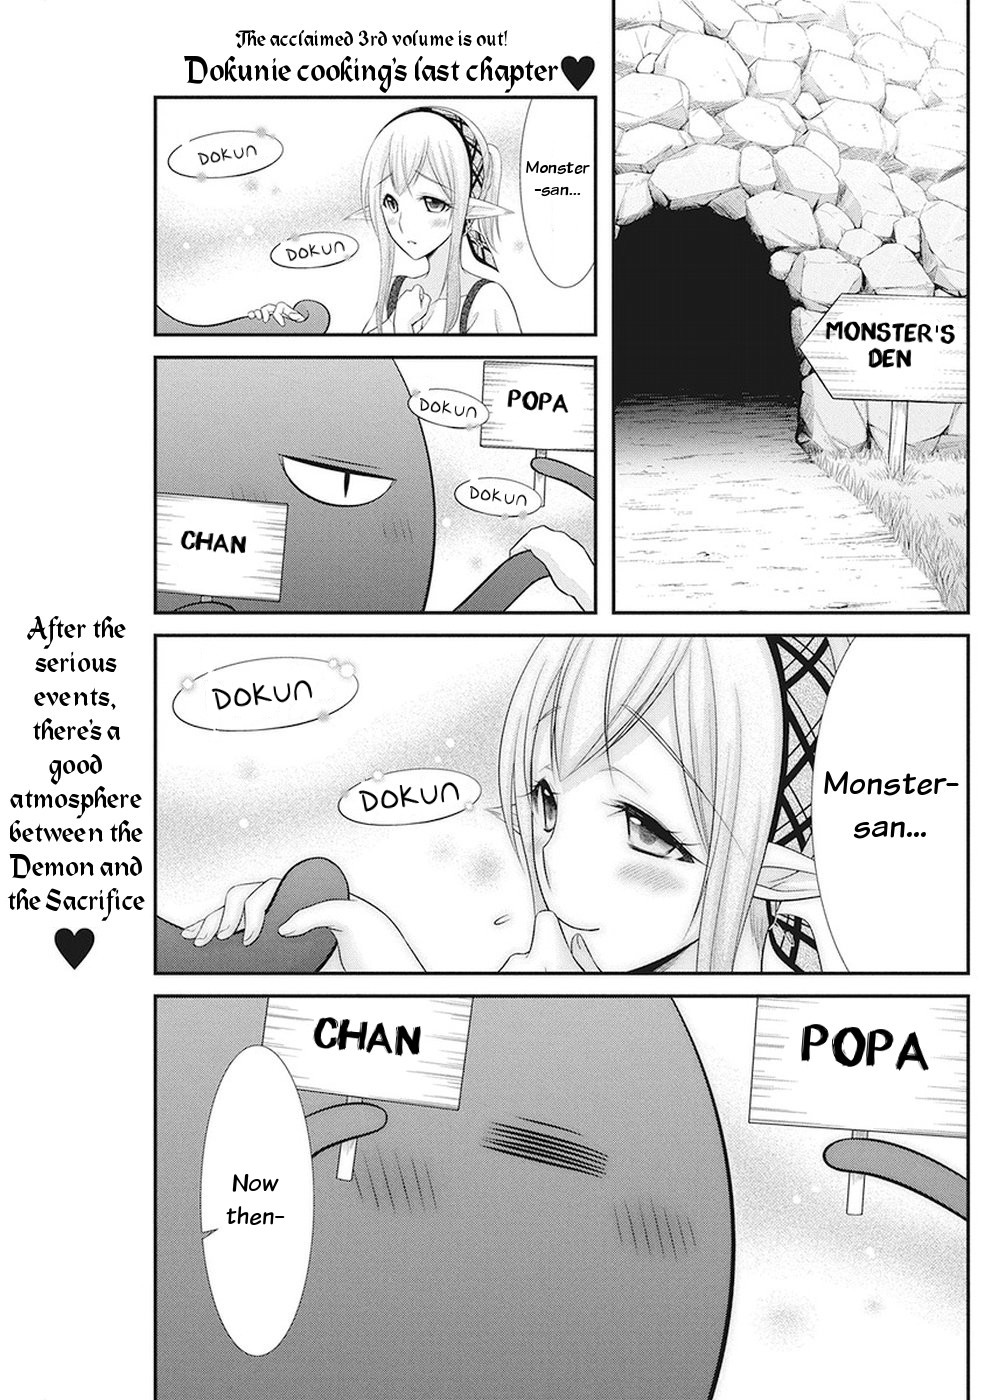 Dokunie Cooking - Page 2